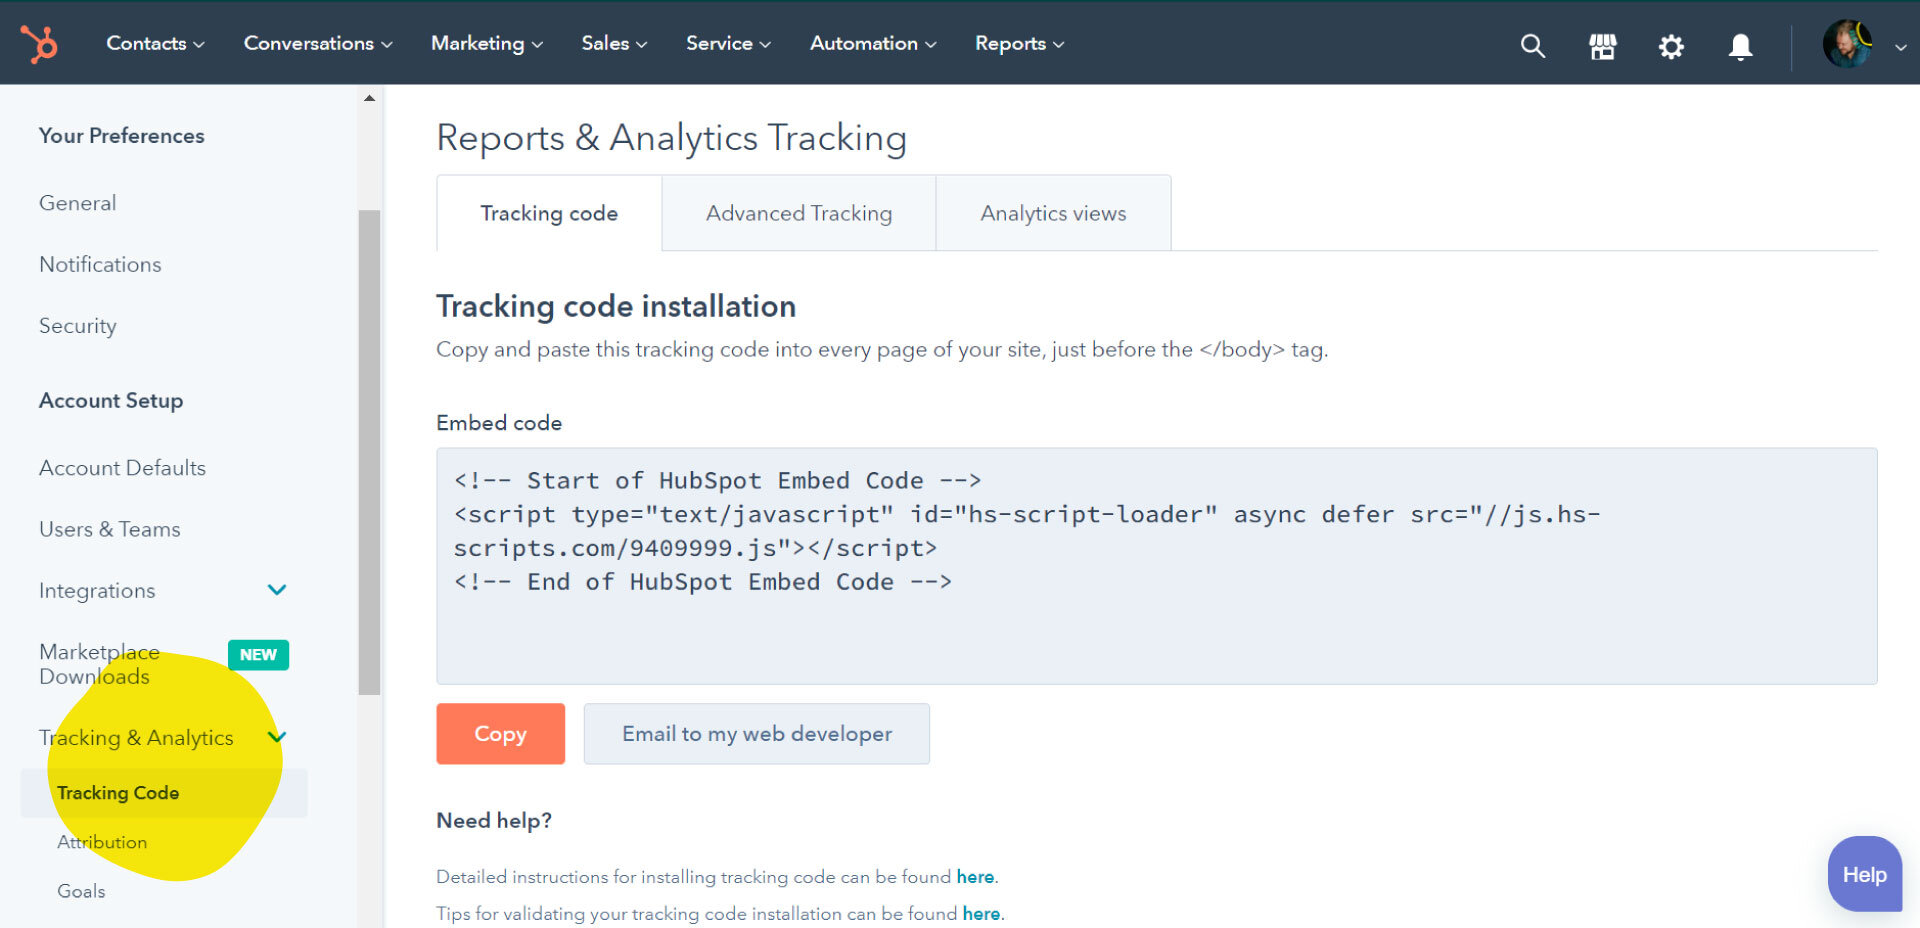 Hubspot’s tracking code is easy to install on Squarespace.